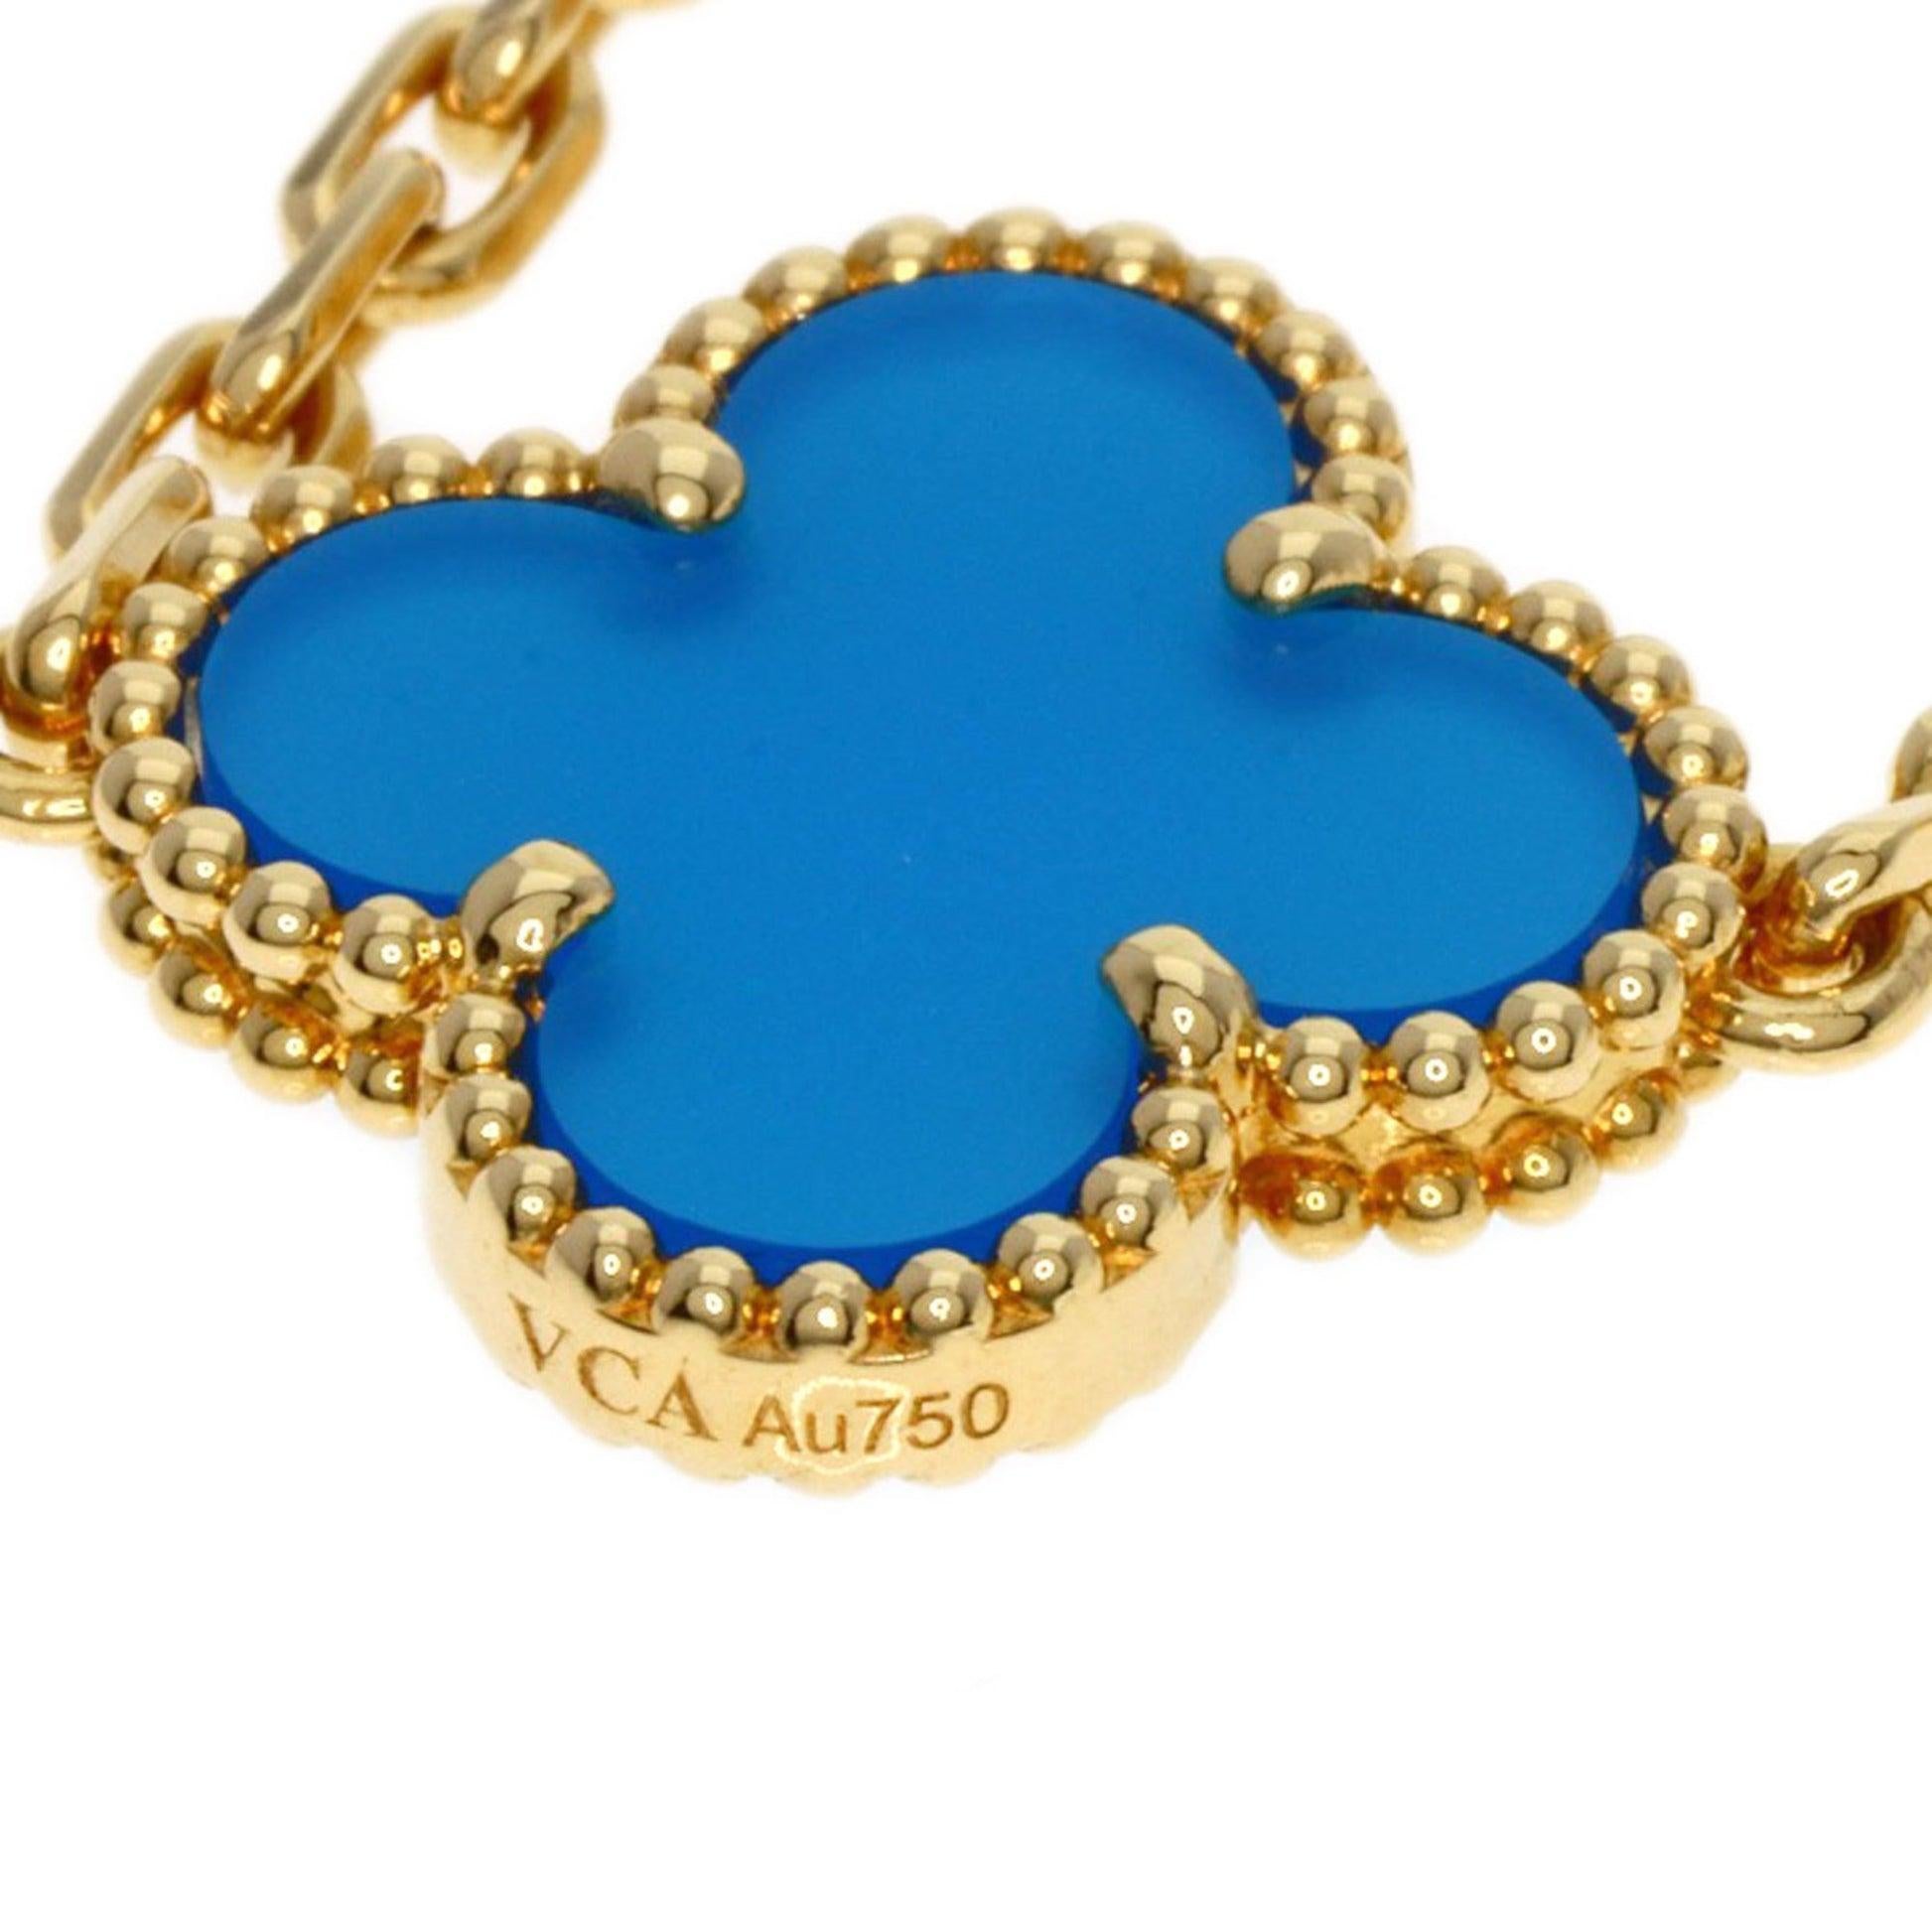 Van Cleef & Arpels Alhambra Blue Agate Necklace in 18K Yellow Gold In Excellent Condition For Sale In London, GB